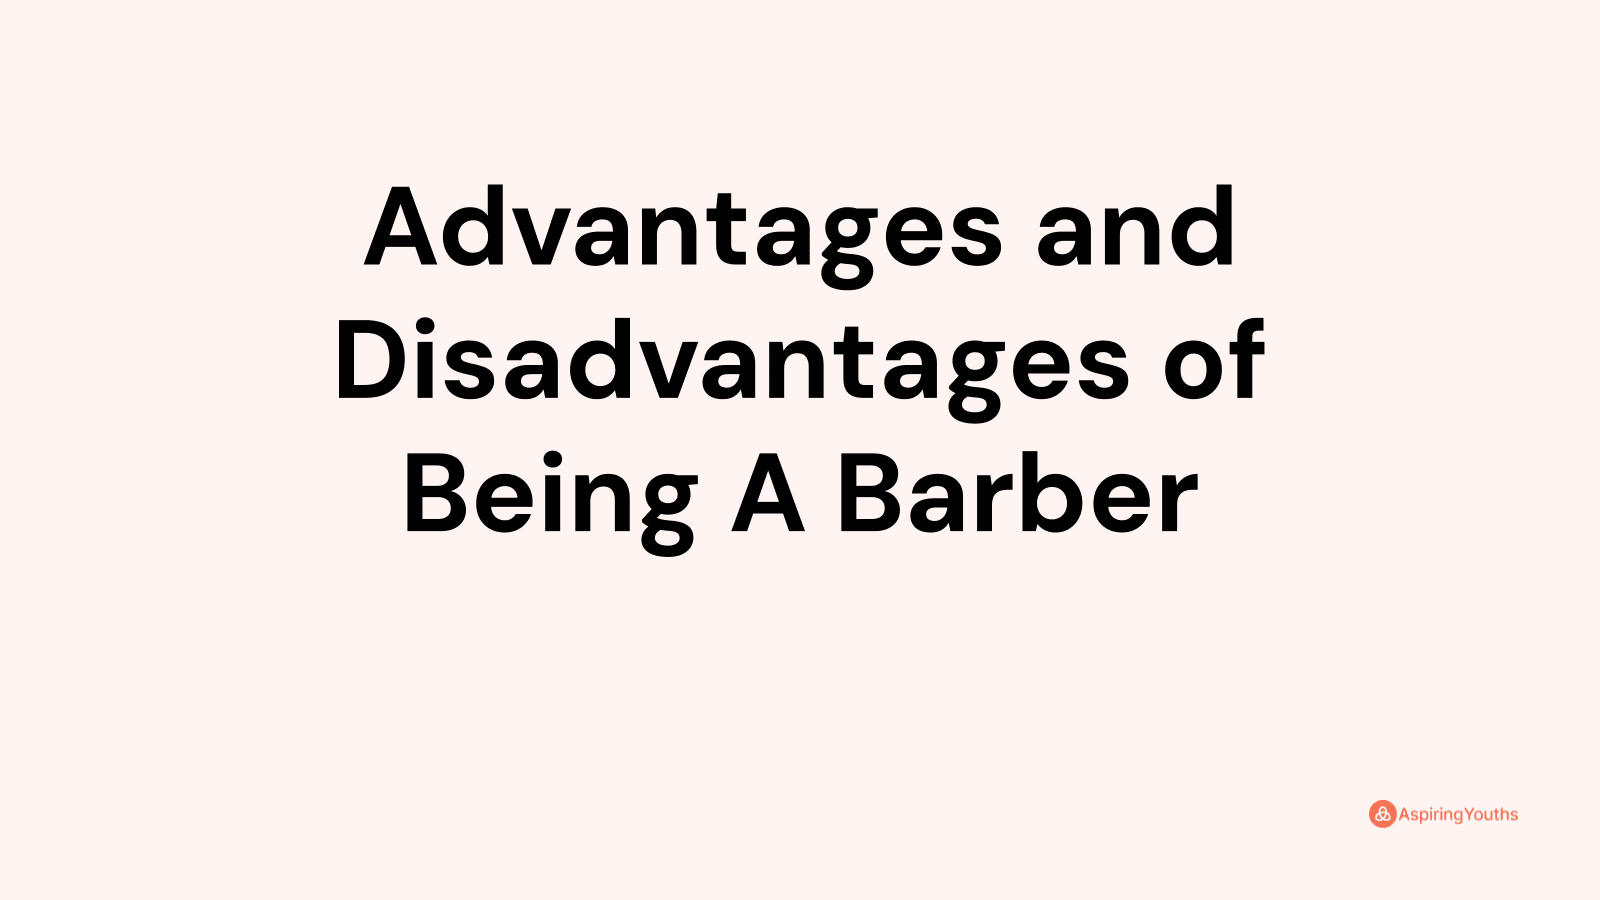 Advantages and disadvantages of Being A Barber